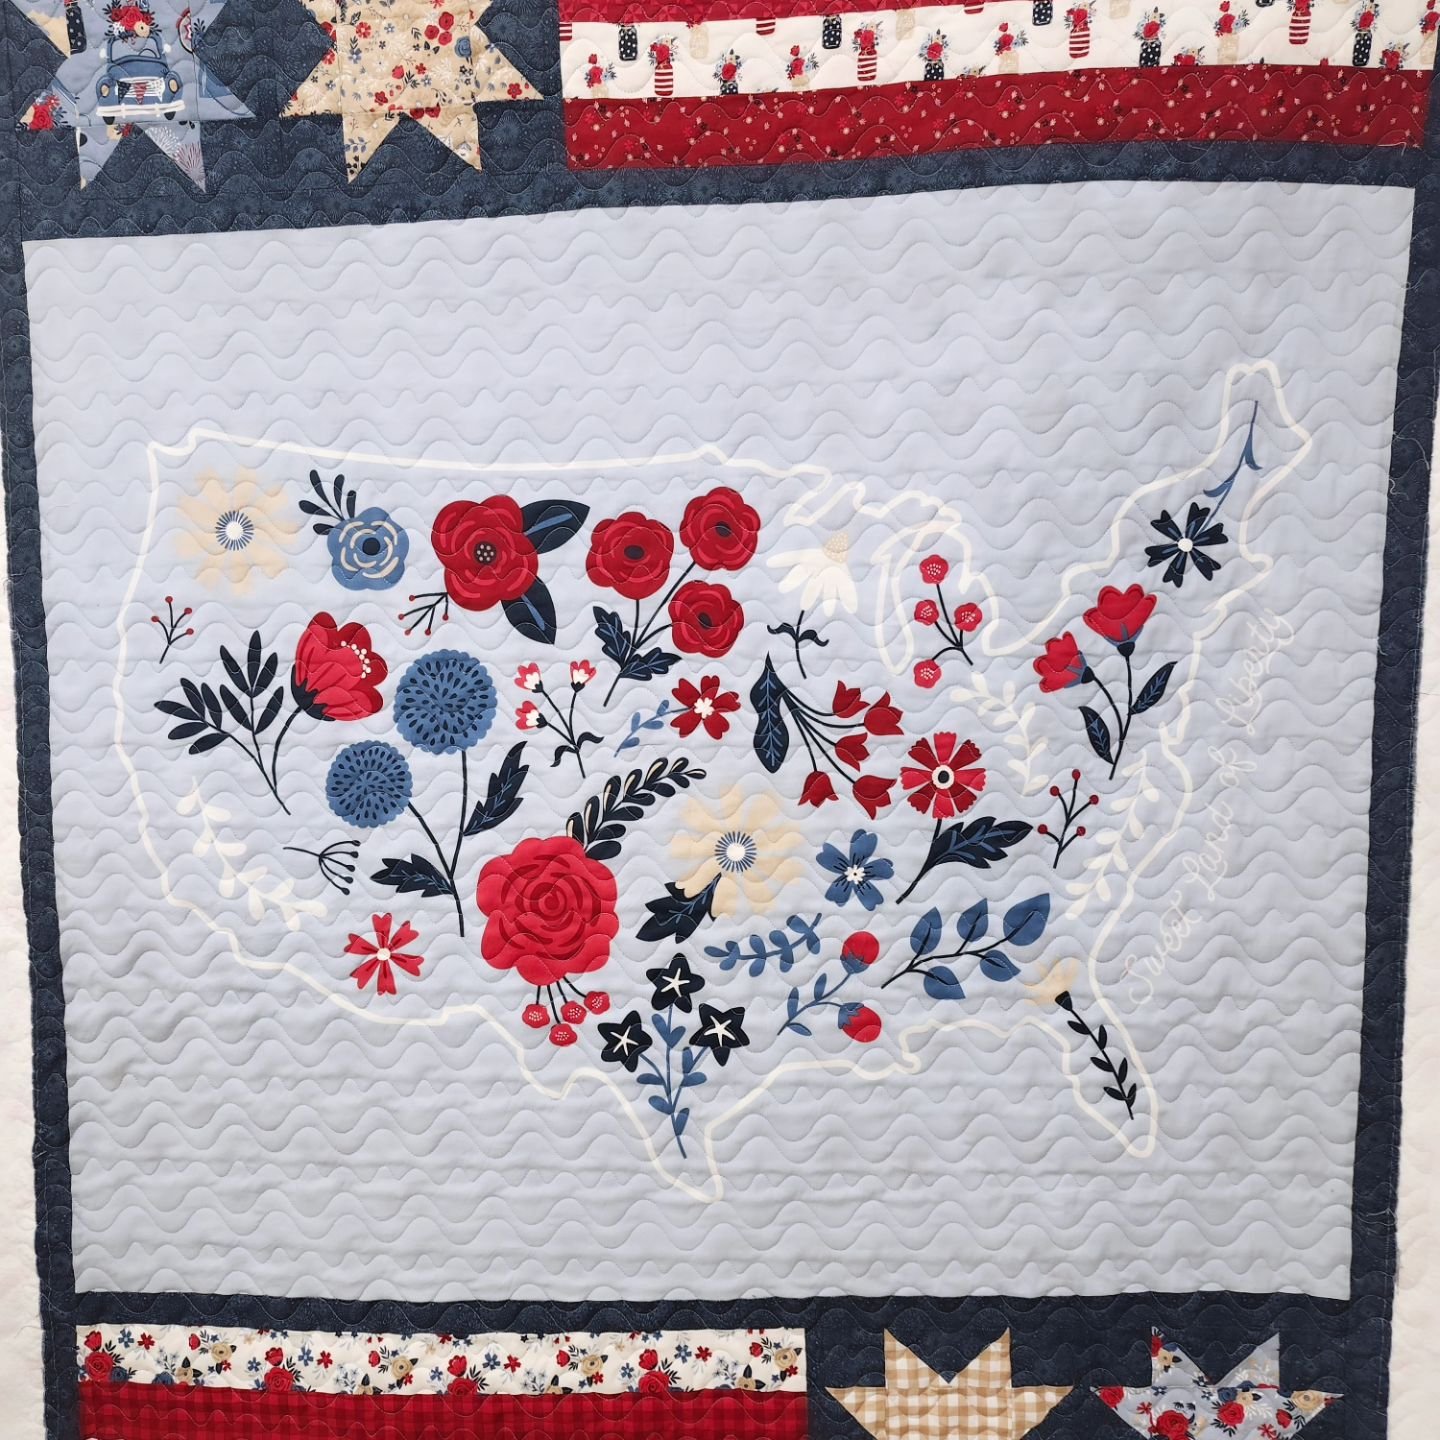 Nancy was in today to longarm this cute red, white and blue wall hanging.  She chose a pattern called 'A Wave in the Sand' #longarmmachinerentals #quiltfun #quiltyourselfawesome #quilting #gammillstatlerstitcher #topstitchery